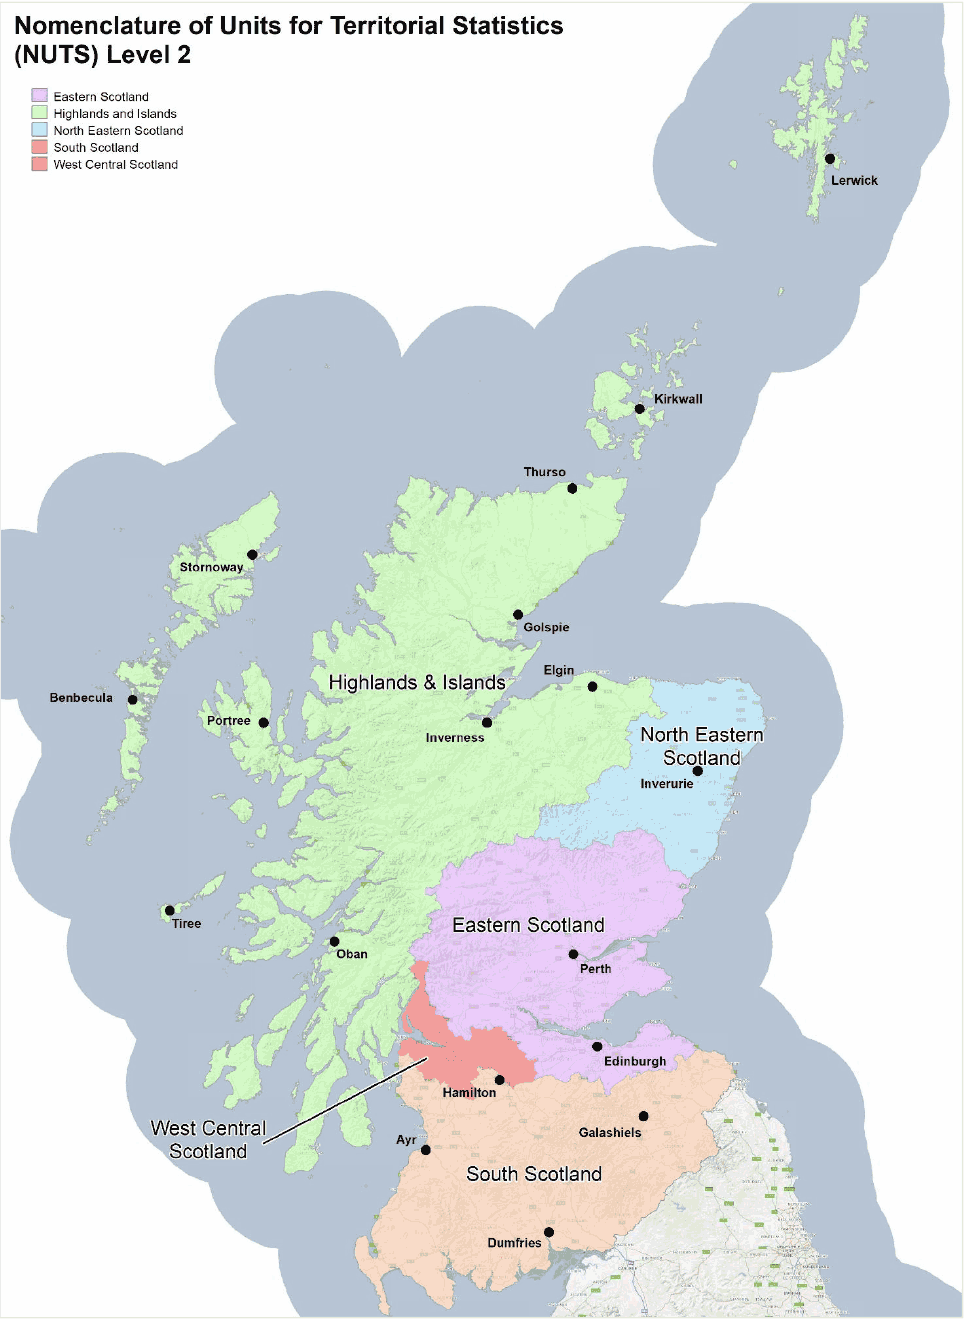 Map of Scotland divided into the five NUTS2 Regions; Eastern Scotland, Highlands and Islands, North Eastern Scotland, South Scotland and West Central Scotland.